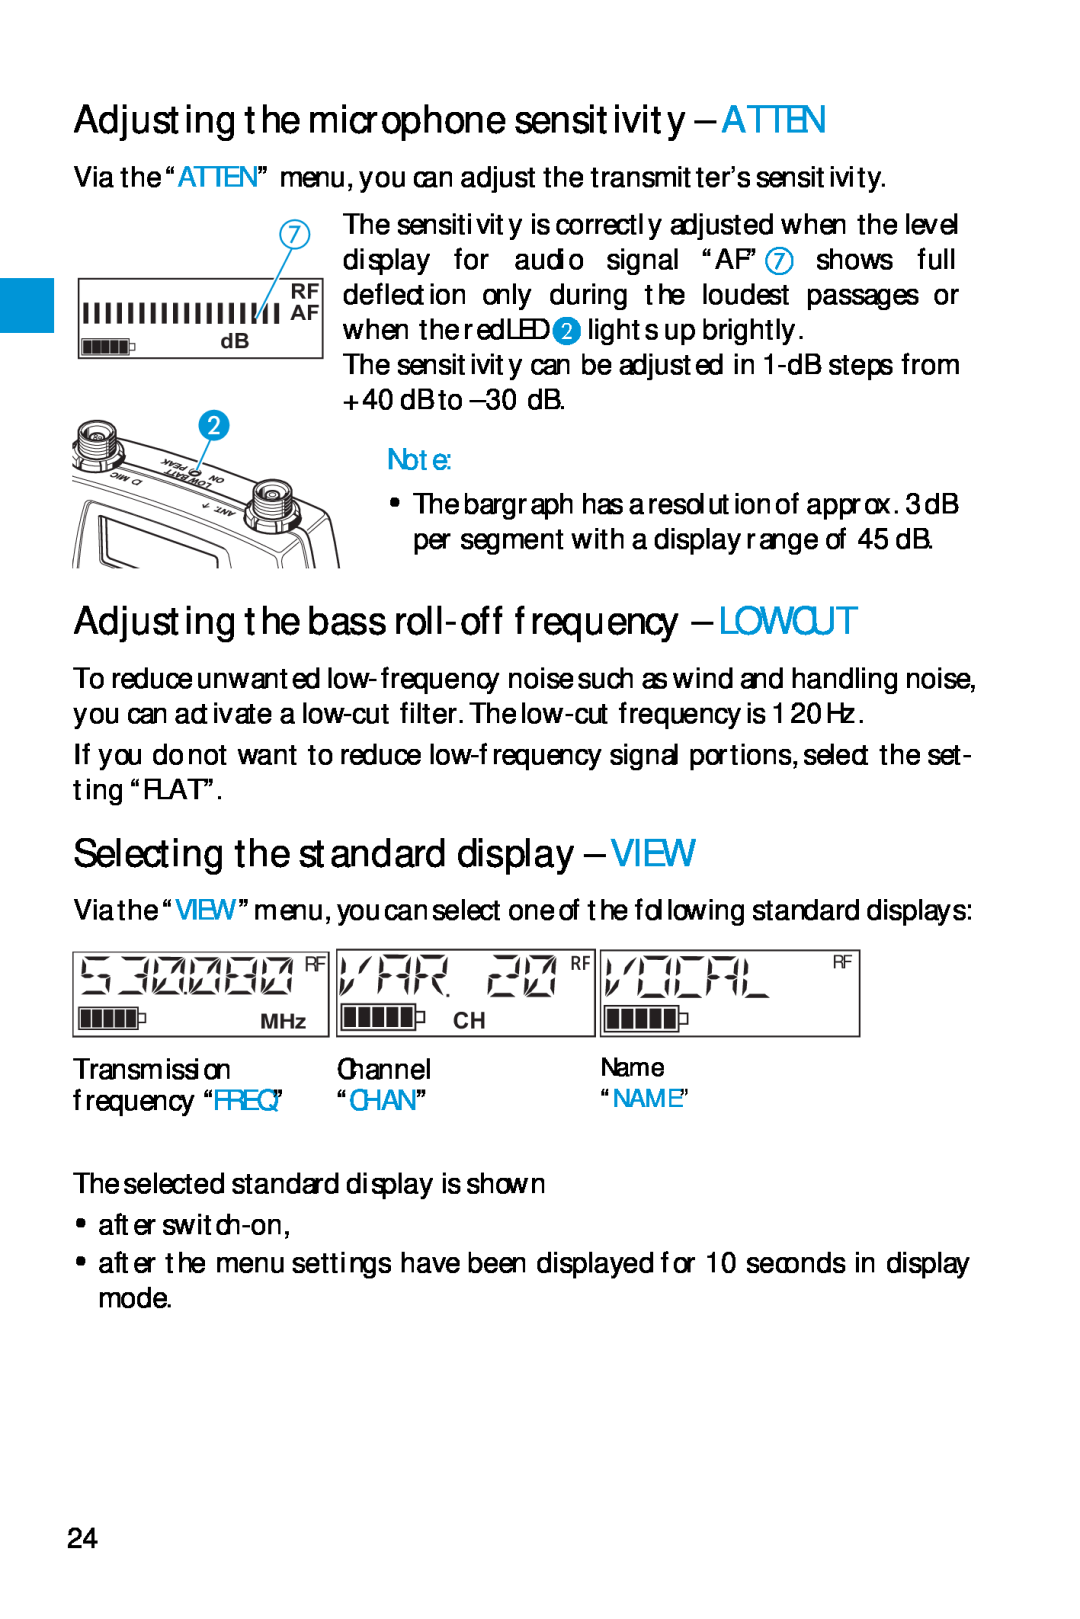 Sennheiser SK 5212 manual Adjusting the microphone sensitivity - ATTEN, Adjusting the bass roll-offfrequency - LOWCUT 